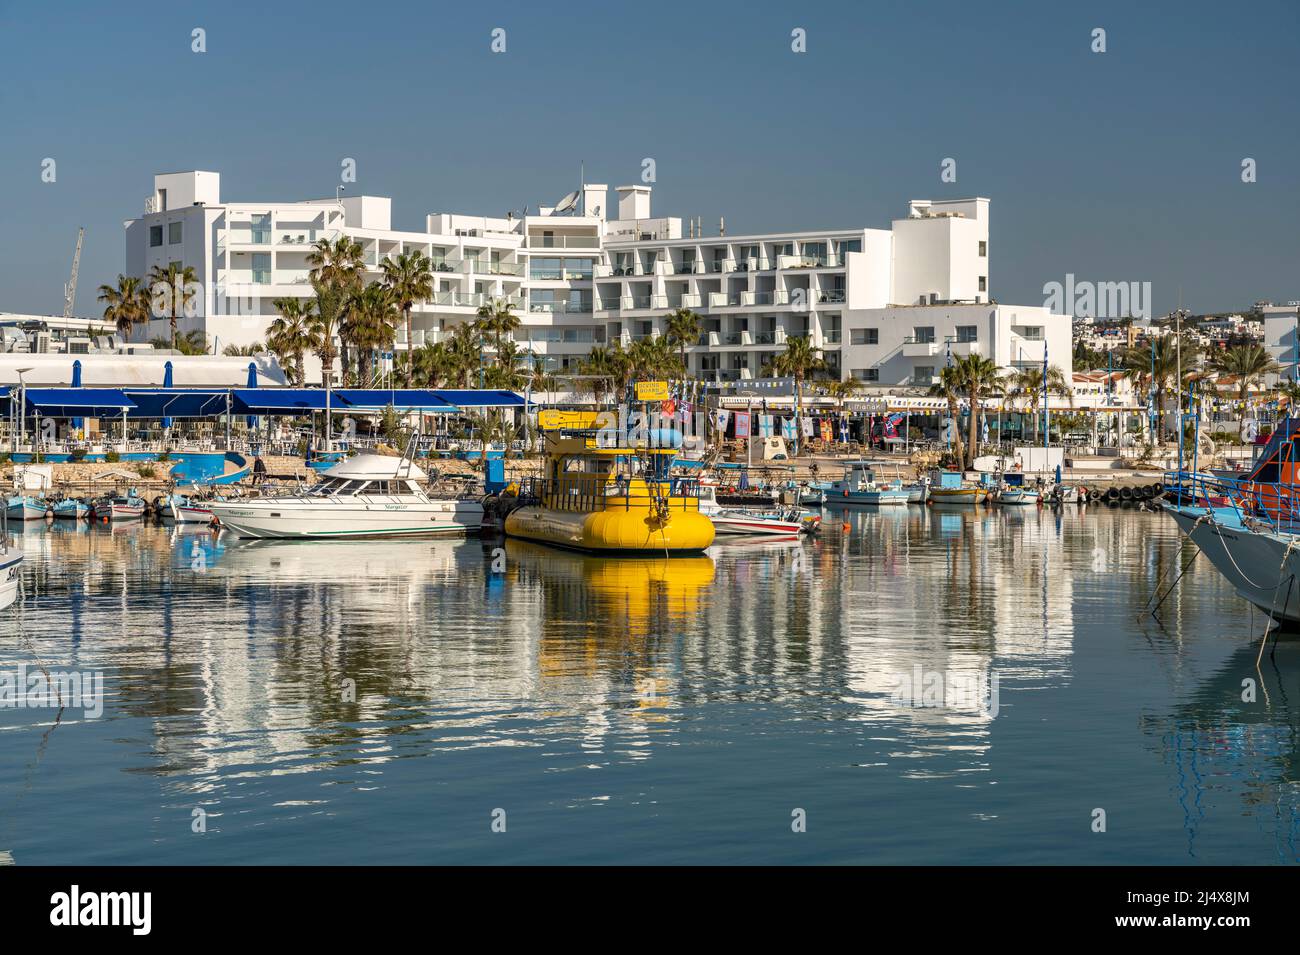 Fischerboote und Ausflugsboote im Hafen von Agia Napa, Zypern, Europa  |  Fishing boats and excursion boats at the harbour of Ayia Napa, Cyprus, Europ Stock Photo